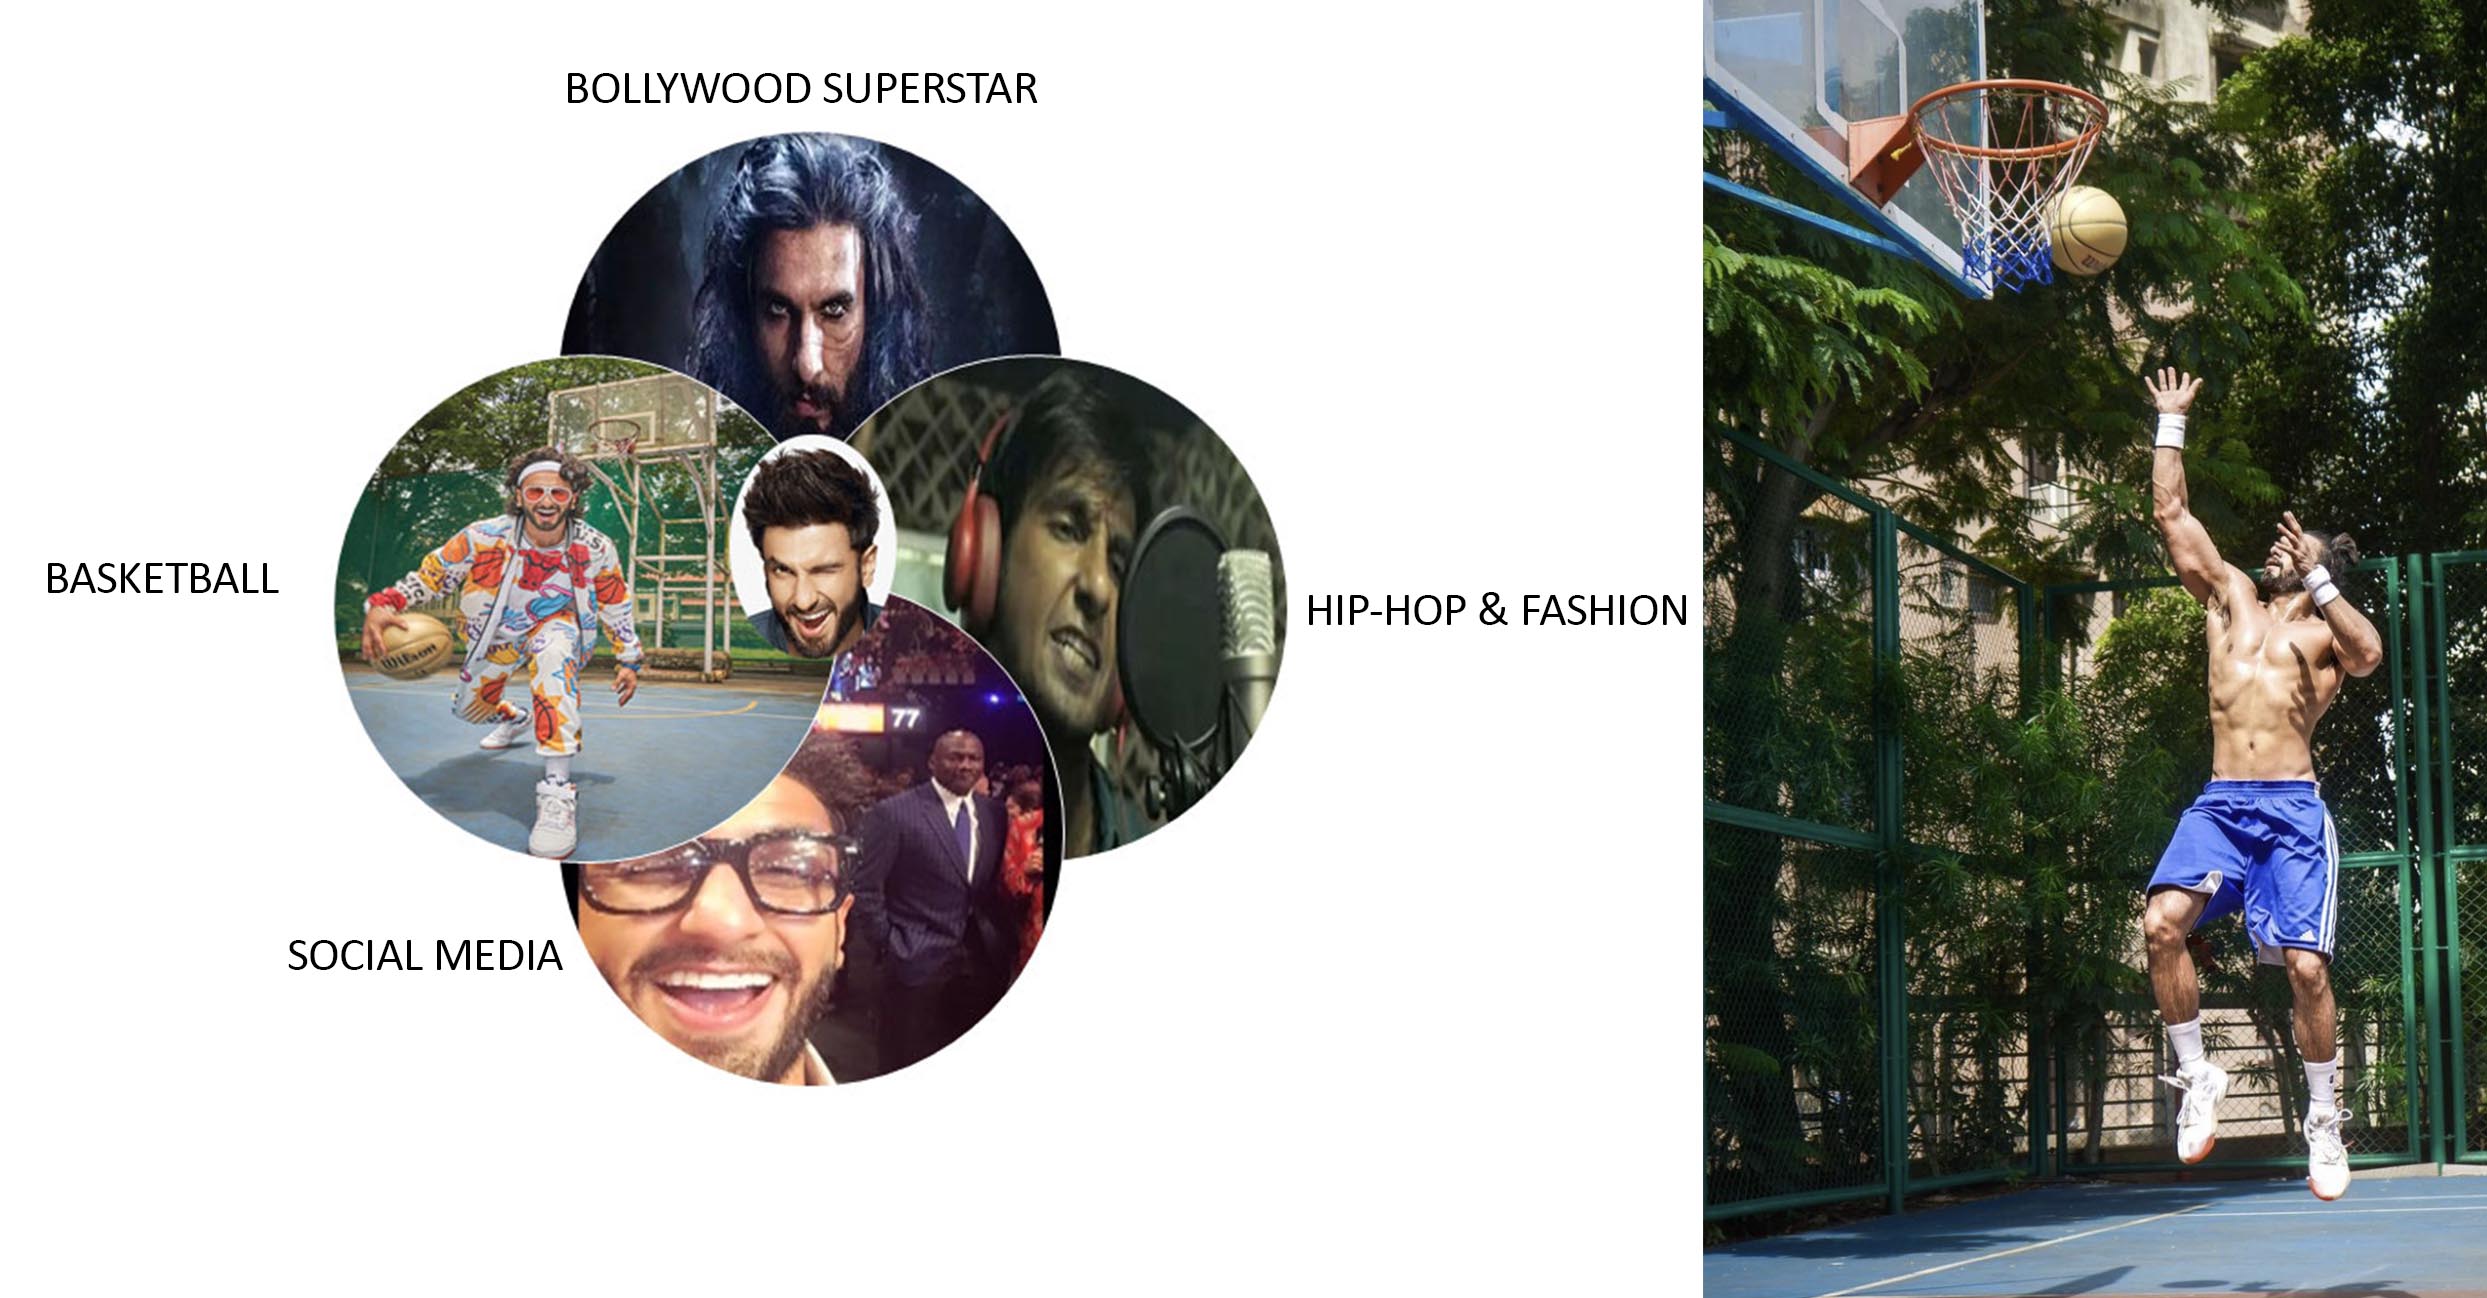 Scouting Report - is Ranveer Singh the ideal Brand Ambassador for